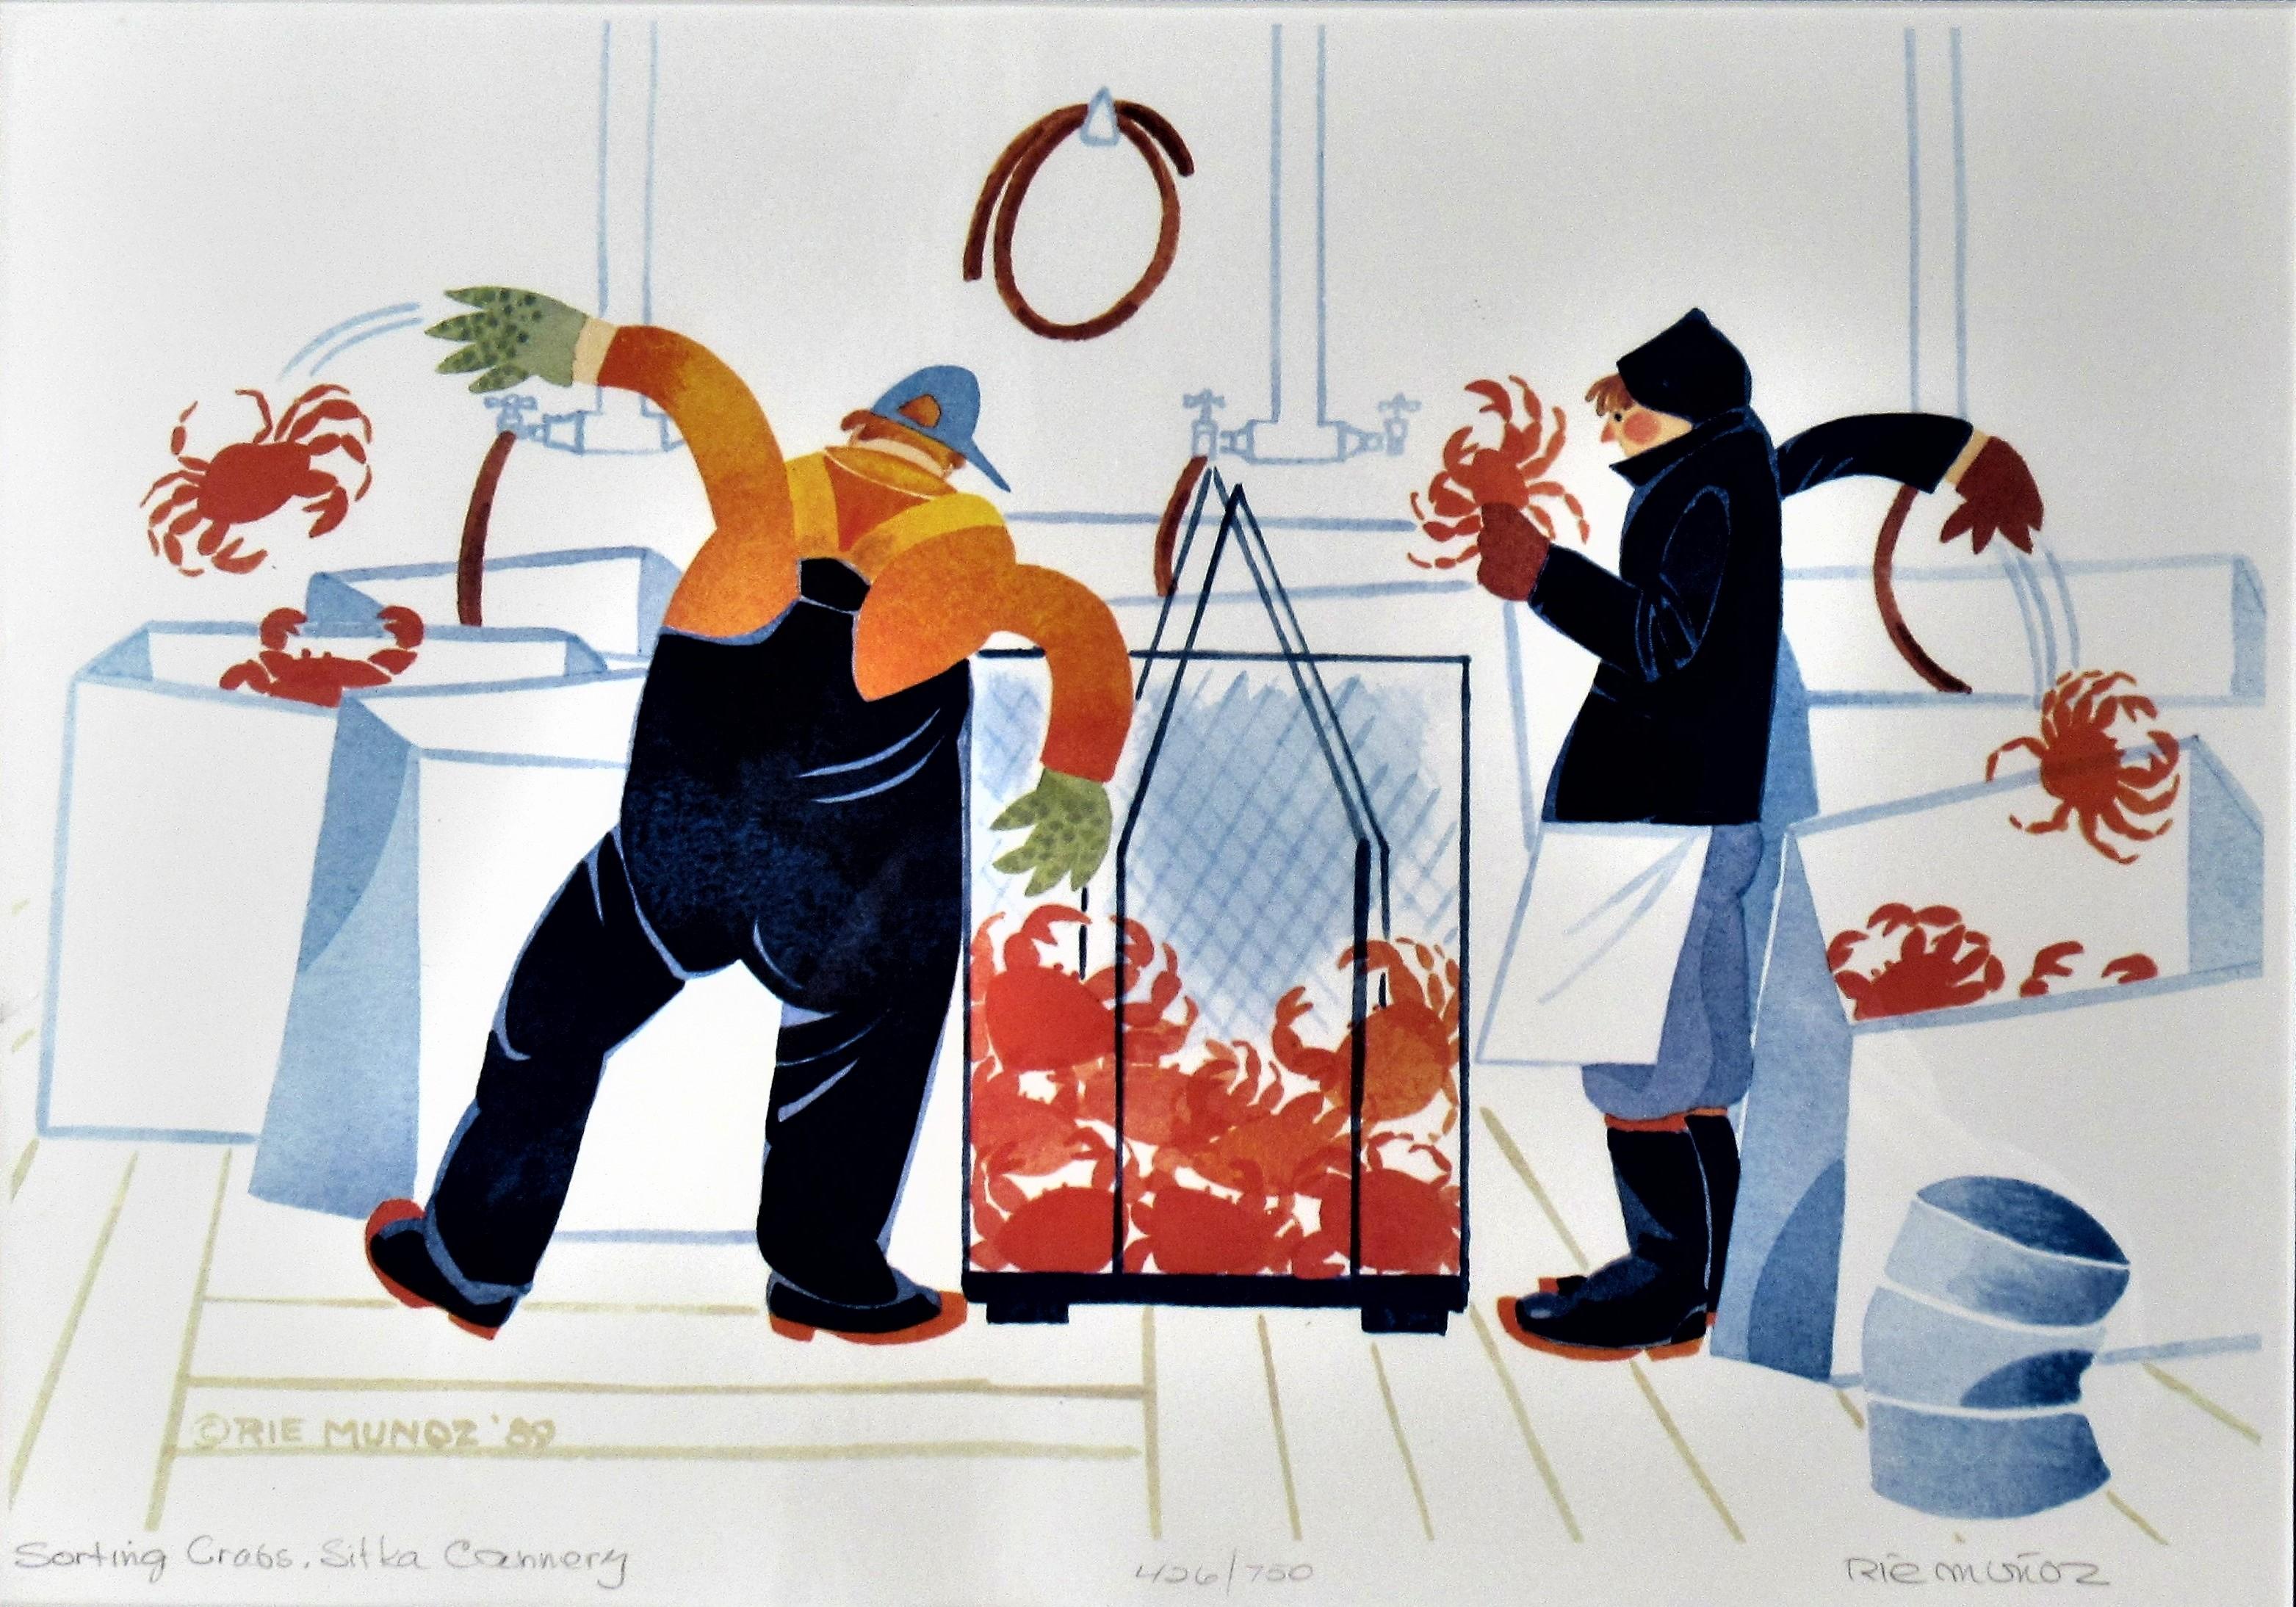 Sorting Crabs, Sitka Cannery - Print by Rie Munoz